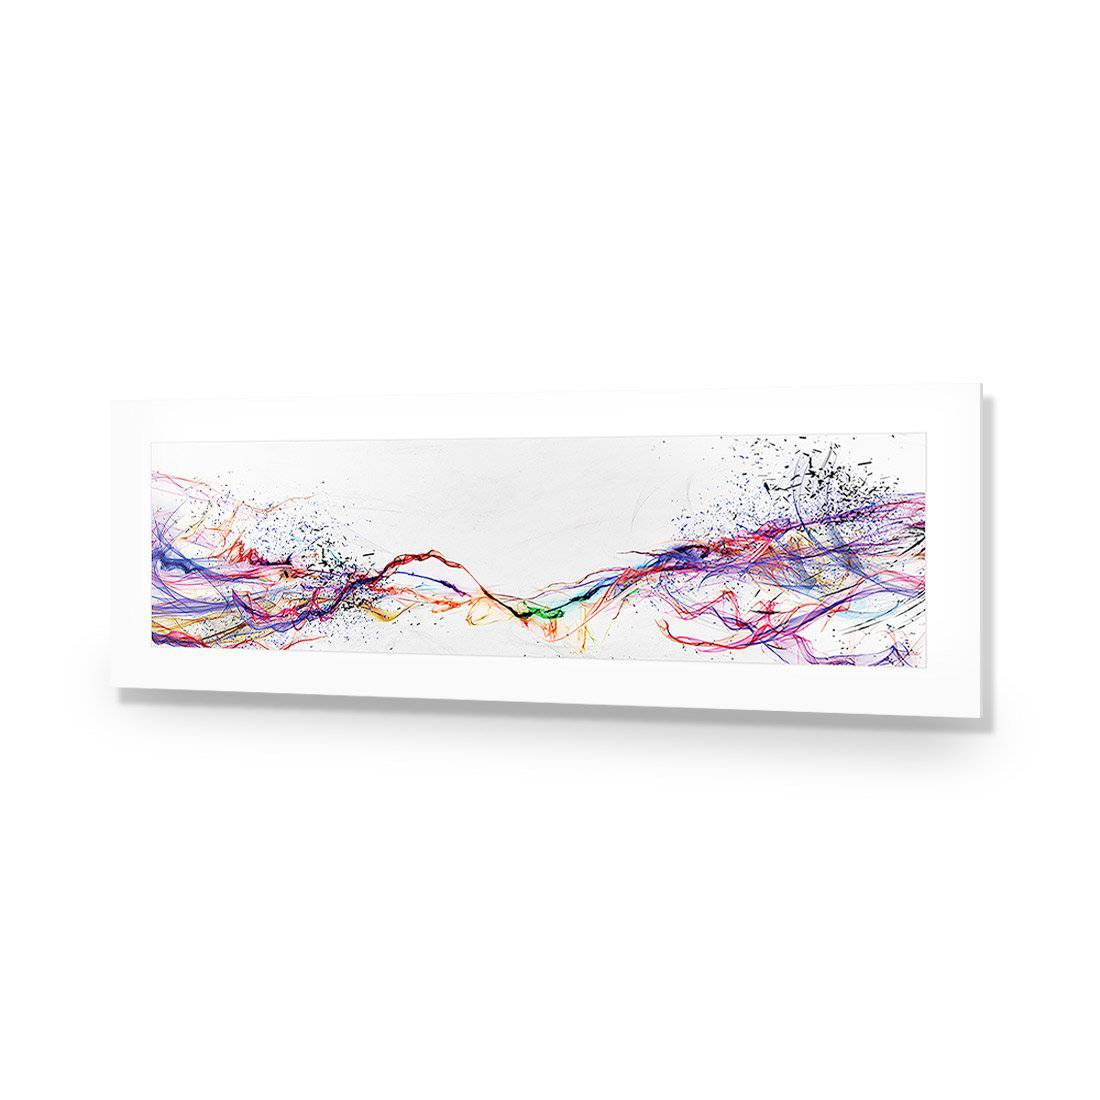 Electricity On Black, Inverted, Long-Acrylic-Wall Art Design-With Border-Acrylic - No Frame-60x20cm-Wall Art Designs